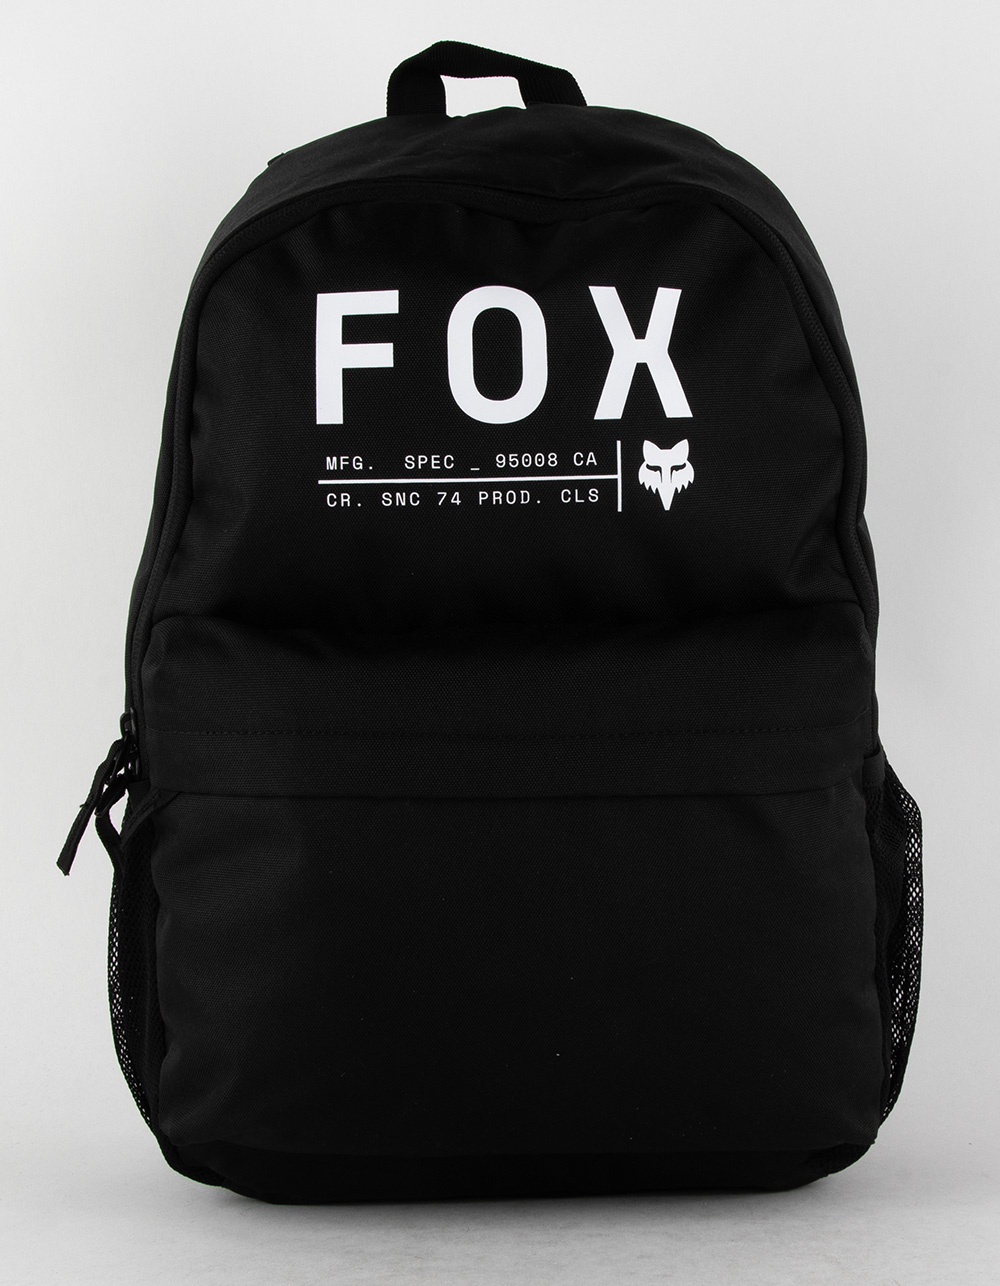  Fox Outdoor Products Retro Parisian City Daypack, Black :  Hiking Daypacks : Sports & Outdoors